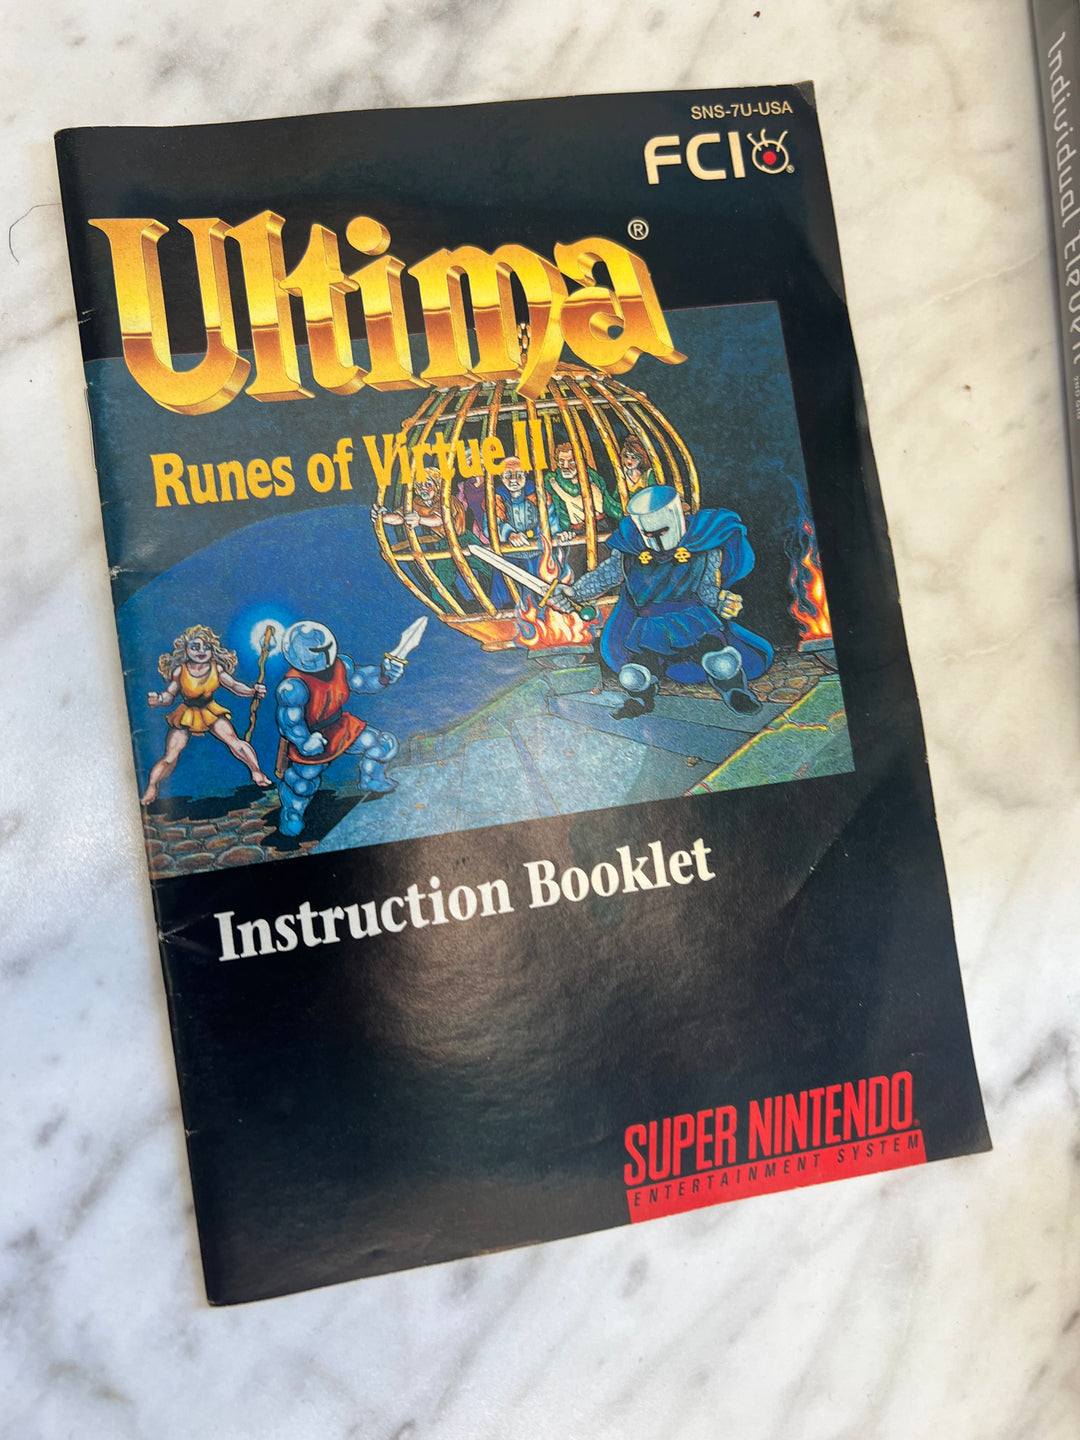 Ultima Runes of Virtue II for SNES Super Nintendo Entertainment System Manual Only MO71624